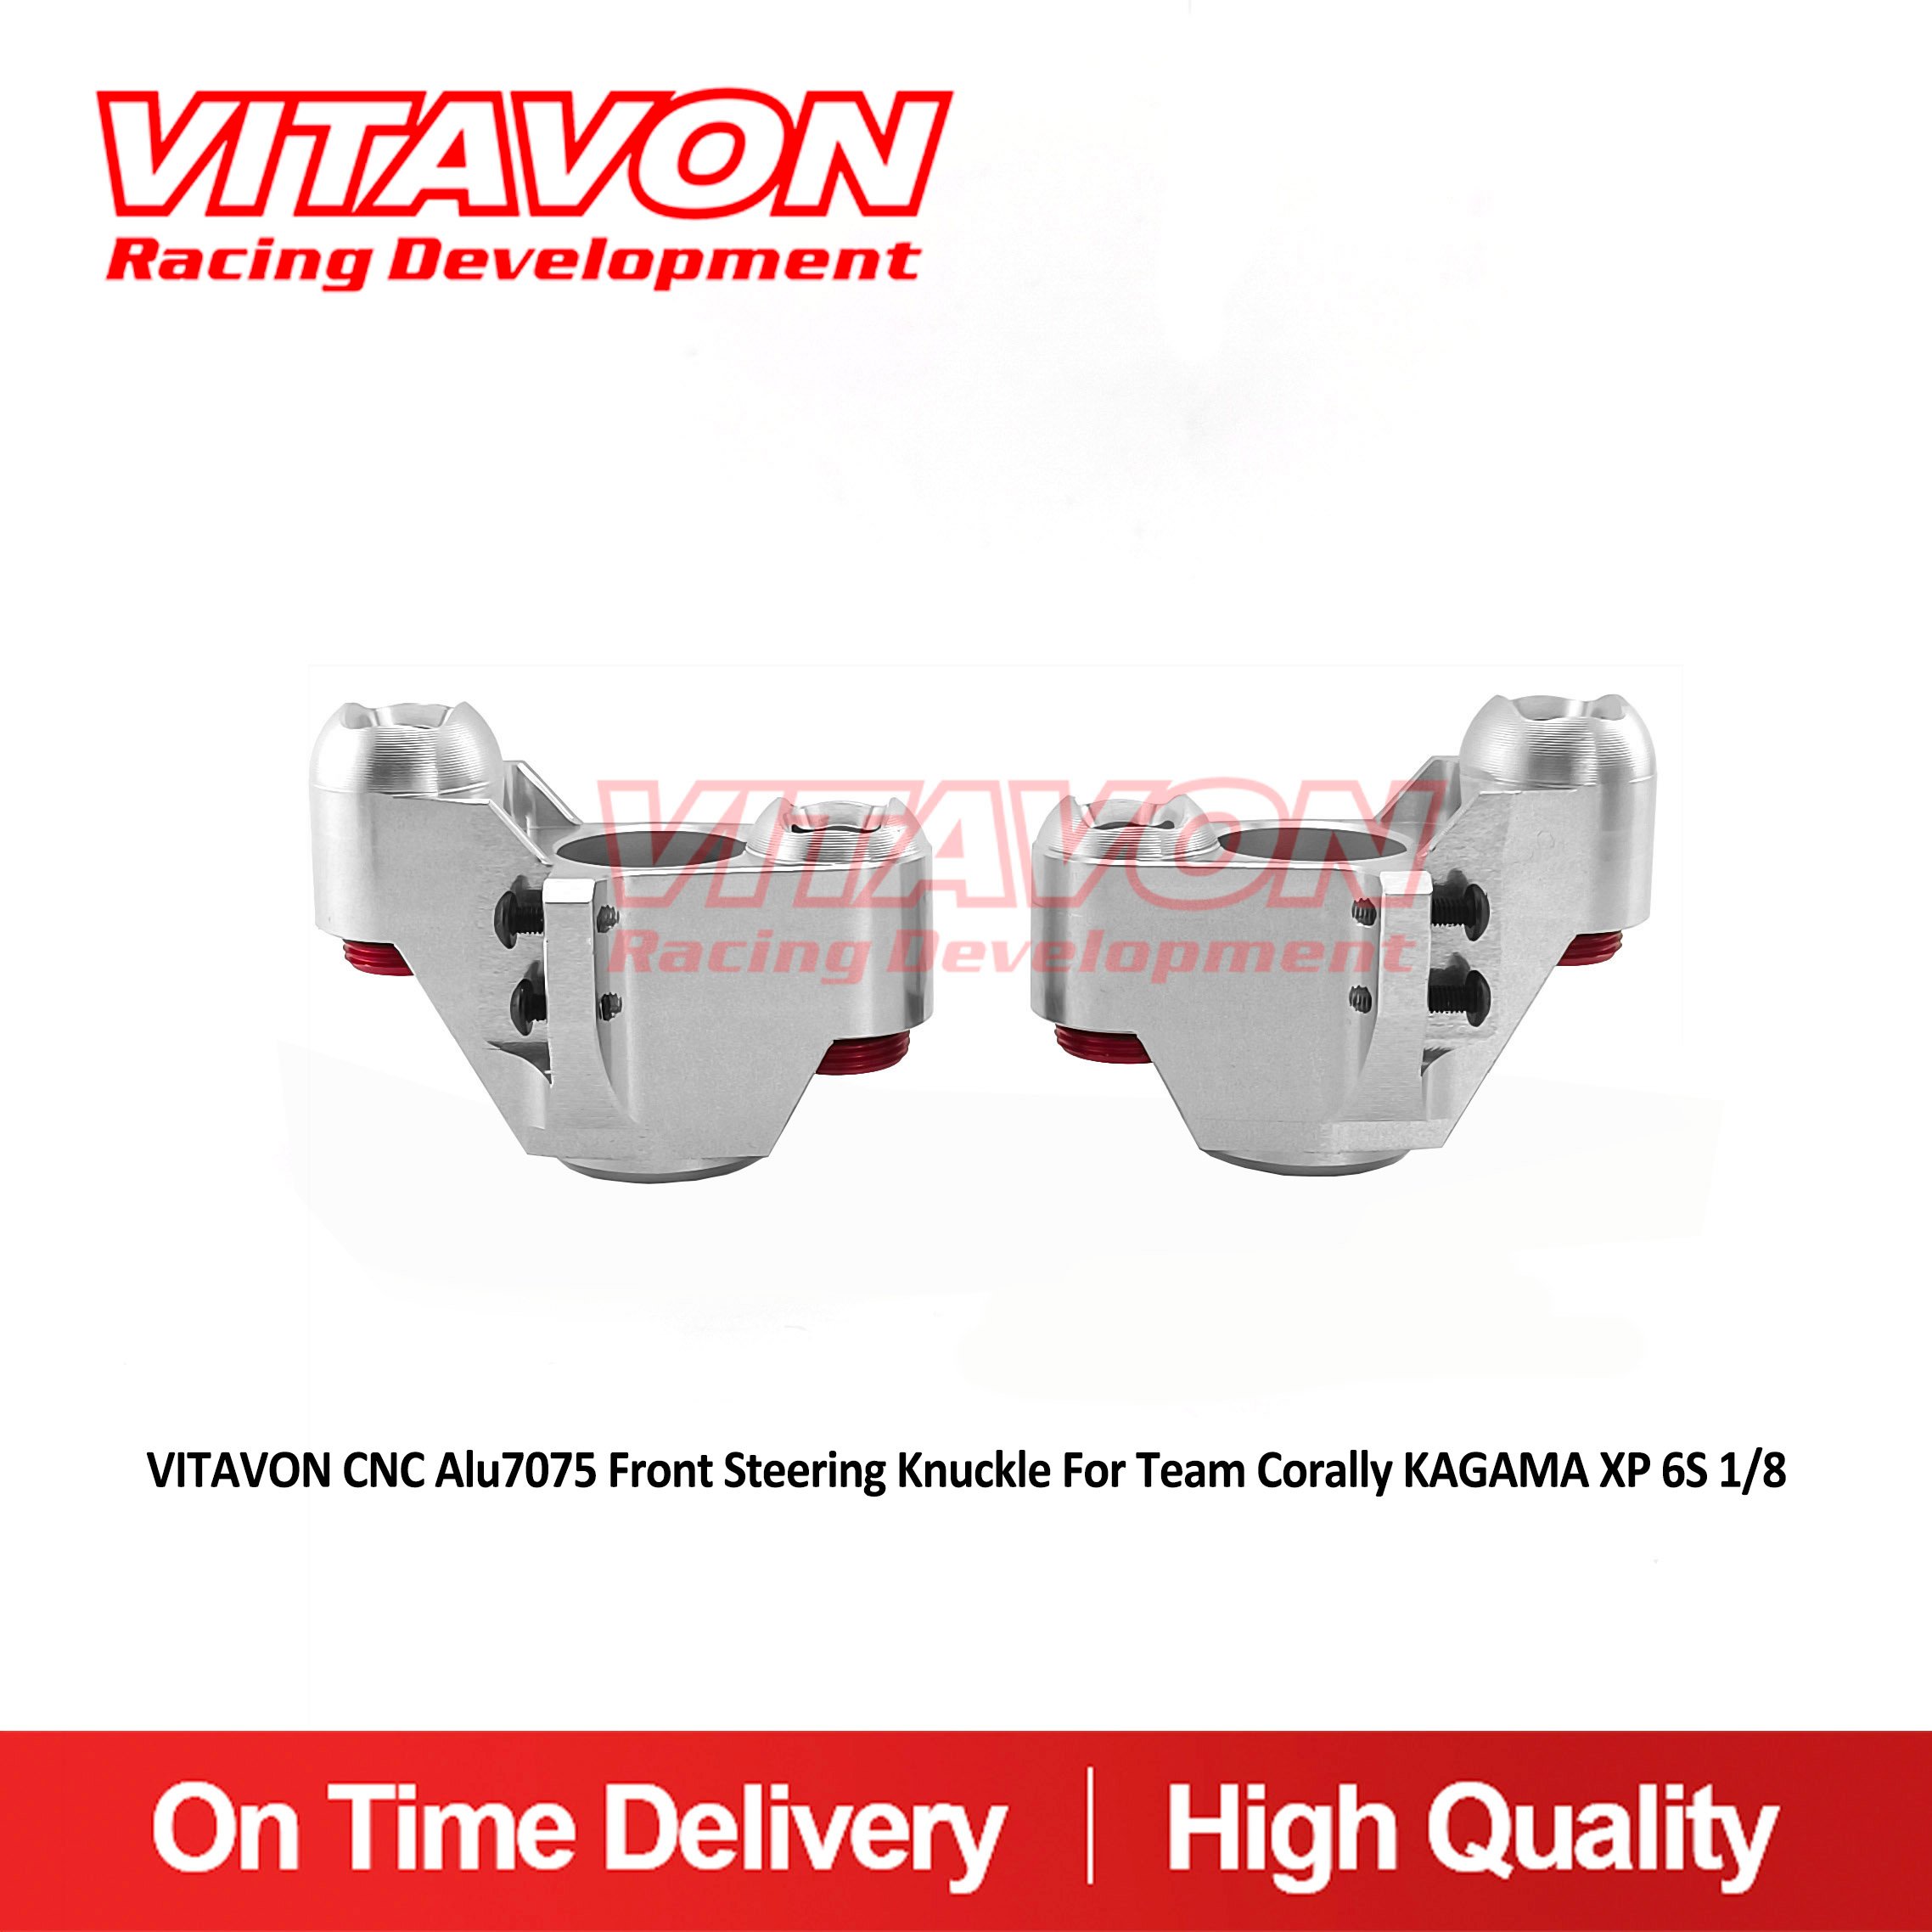 VITAVON CNC Alu7075 Front Steering Knuckle For Team Corally KAGAMA XP 6S 1/8